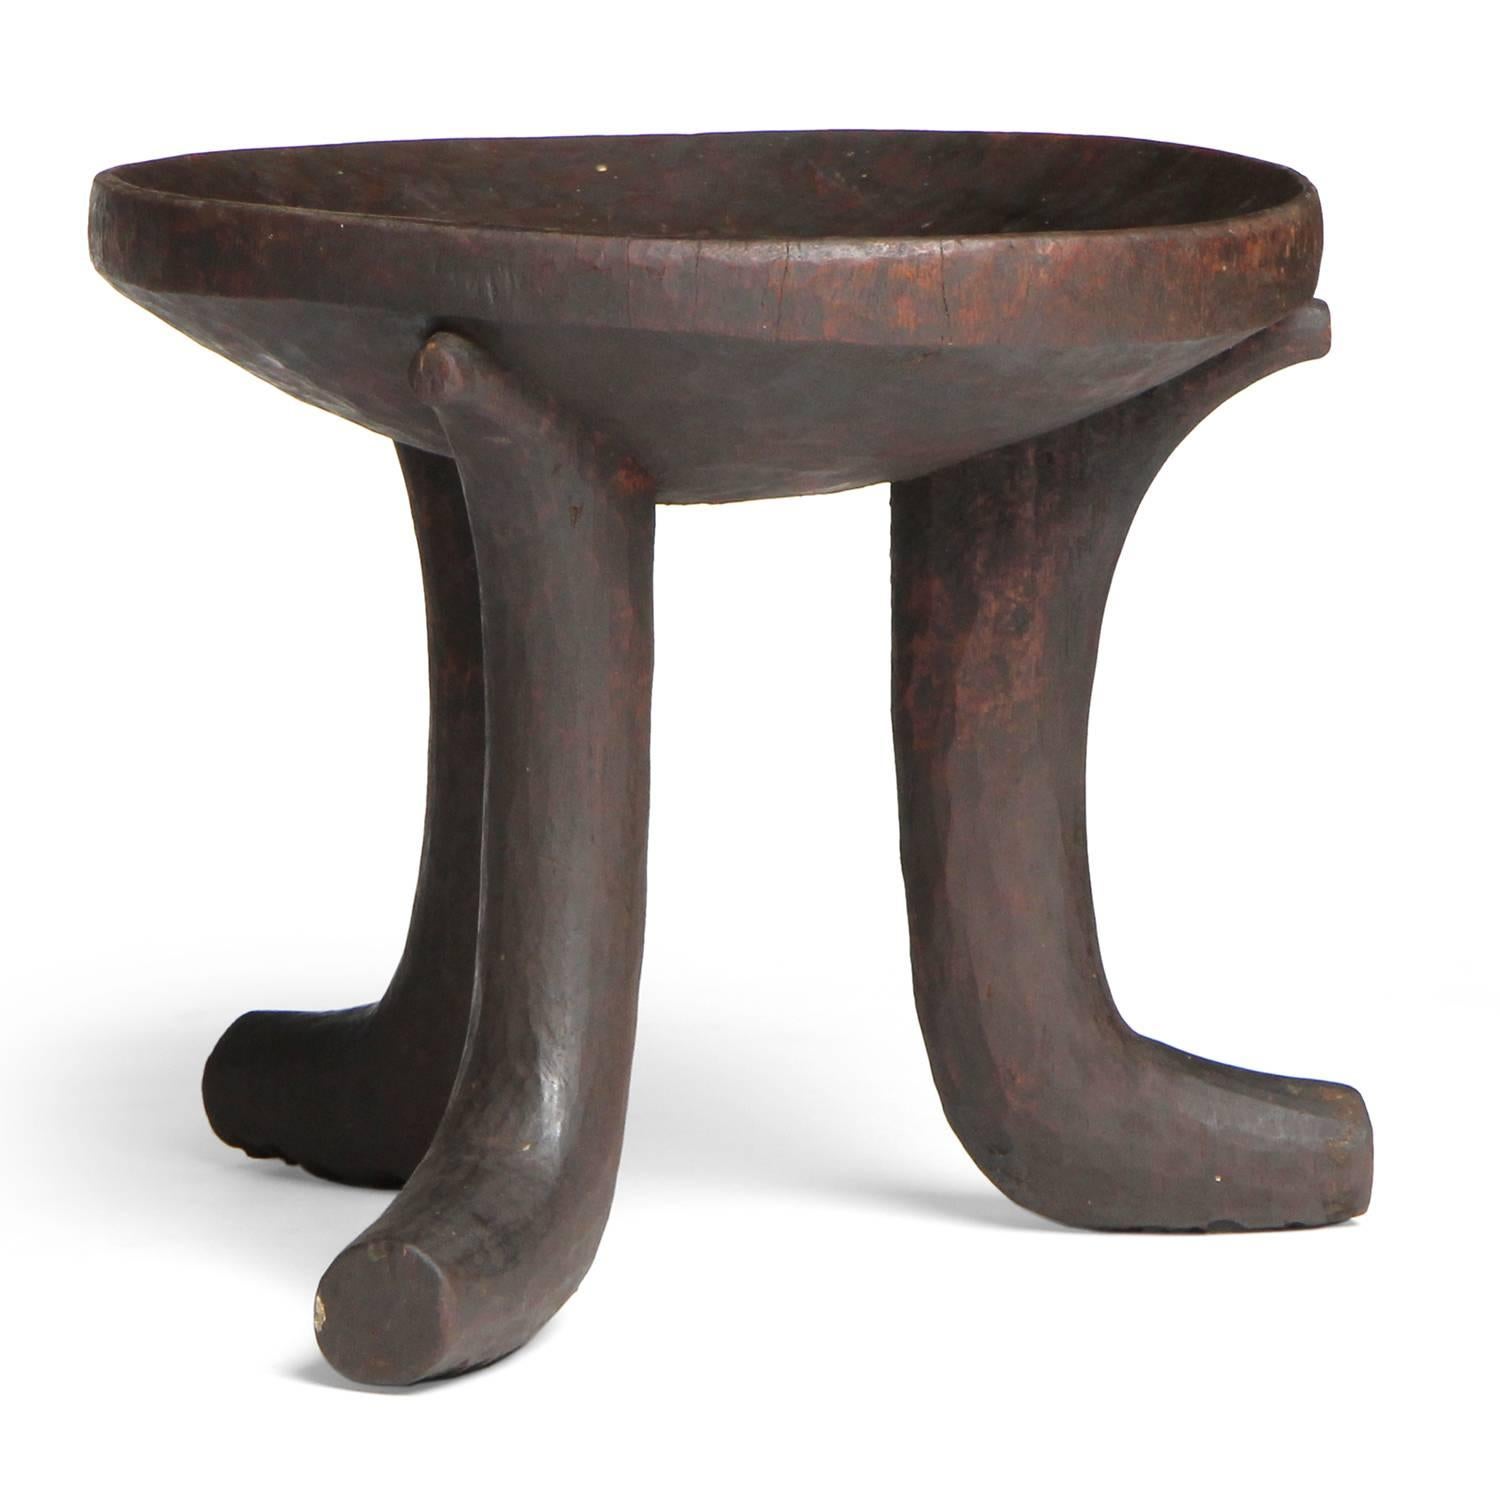 A well carved and warmly patinated tribal stool made from a single block of hardwood and having three splayed legs.